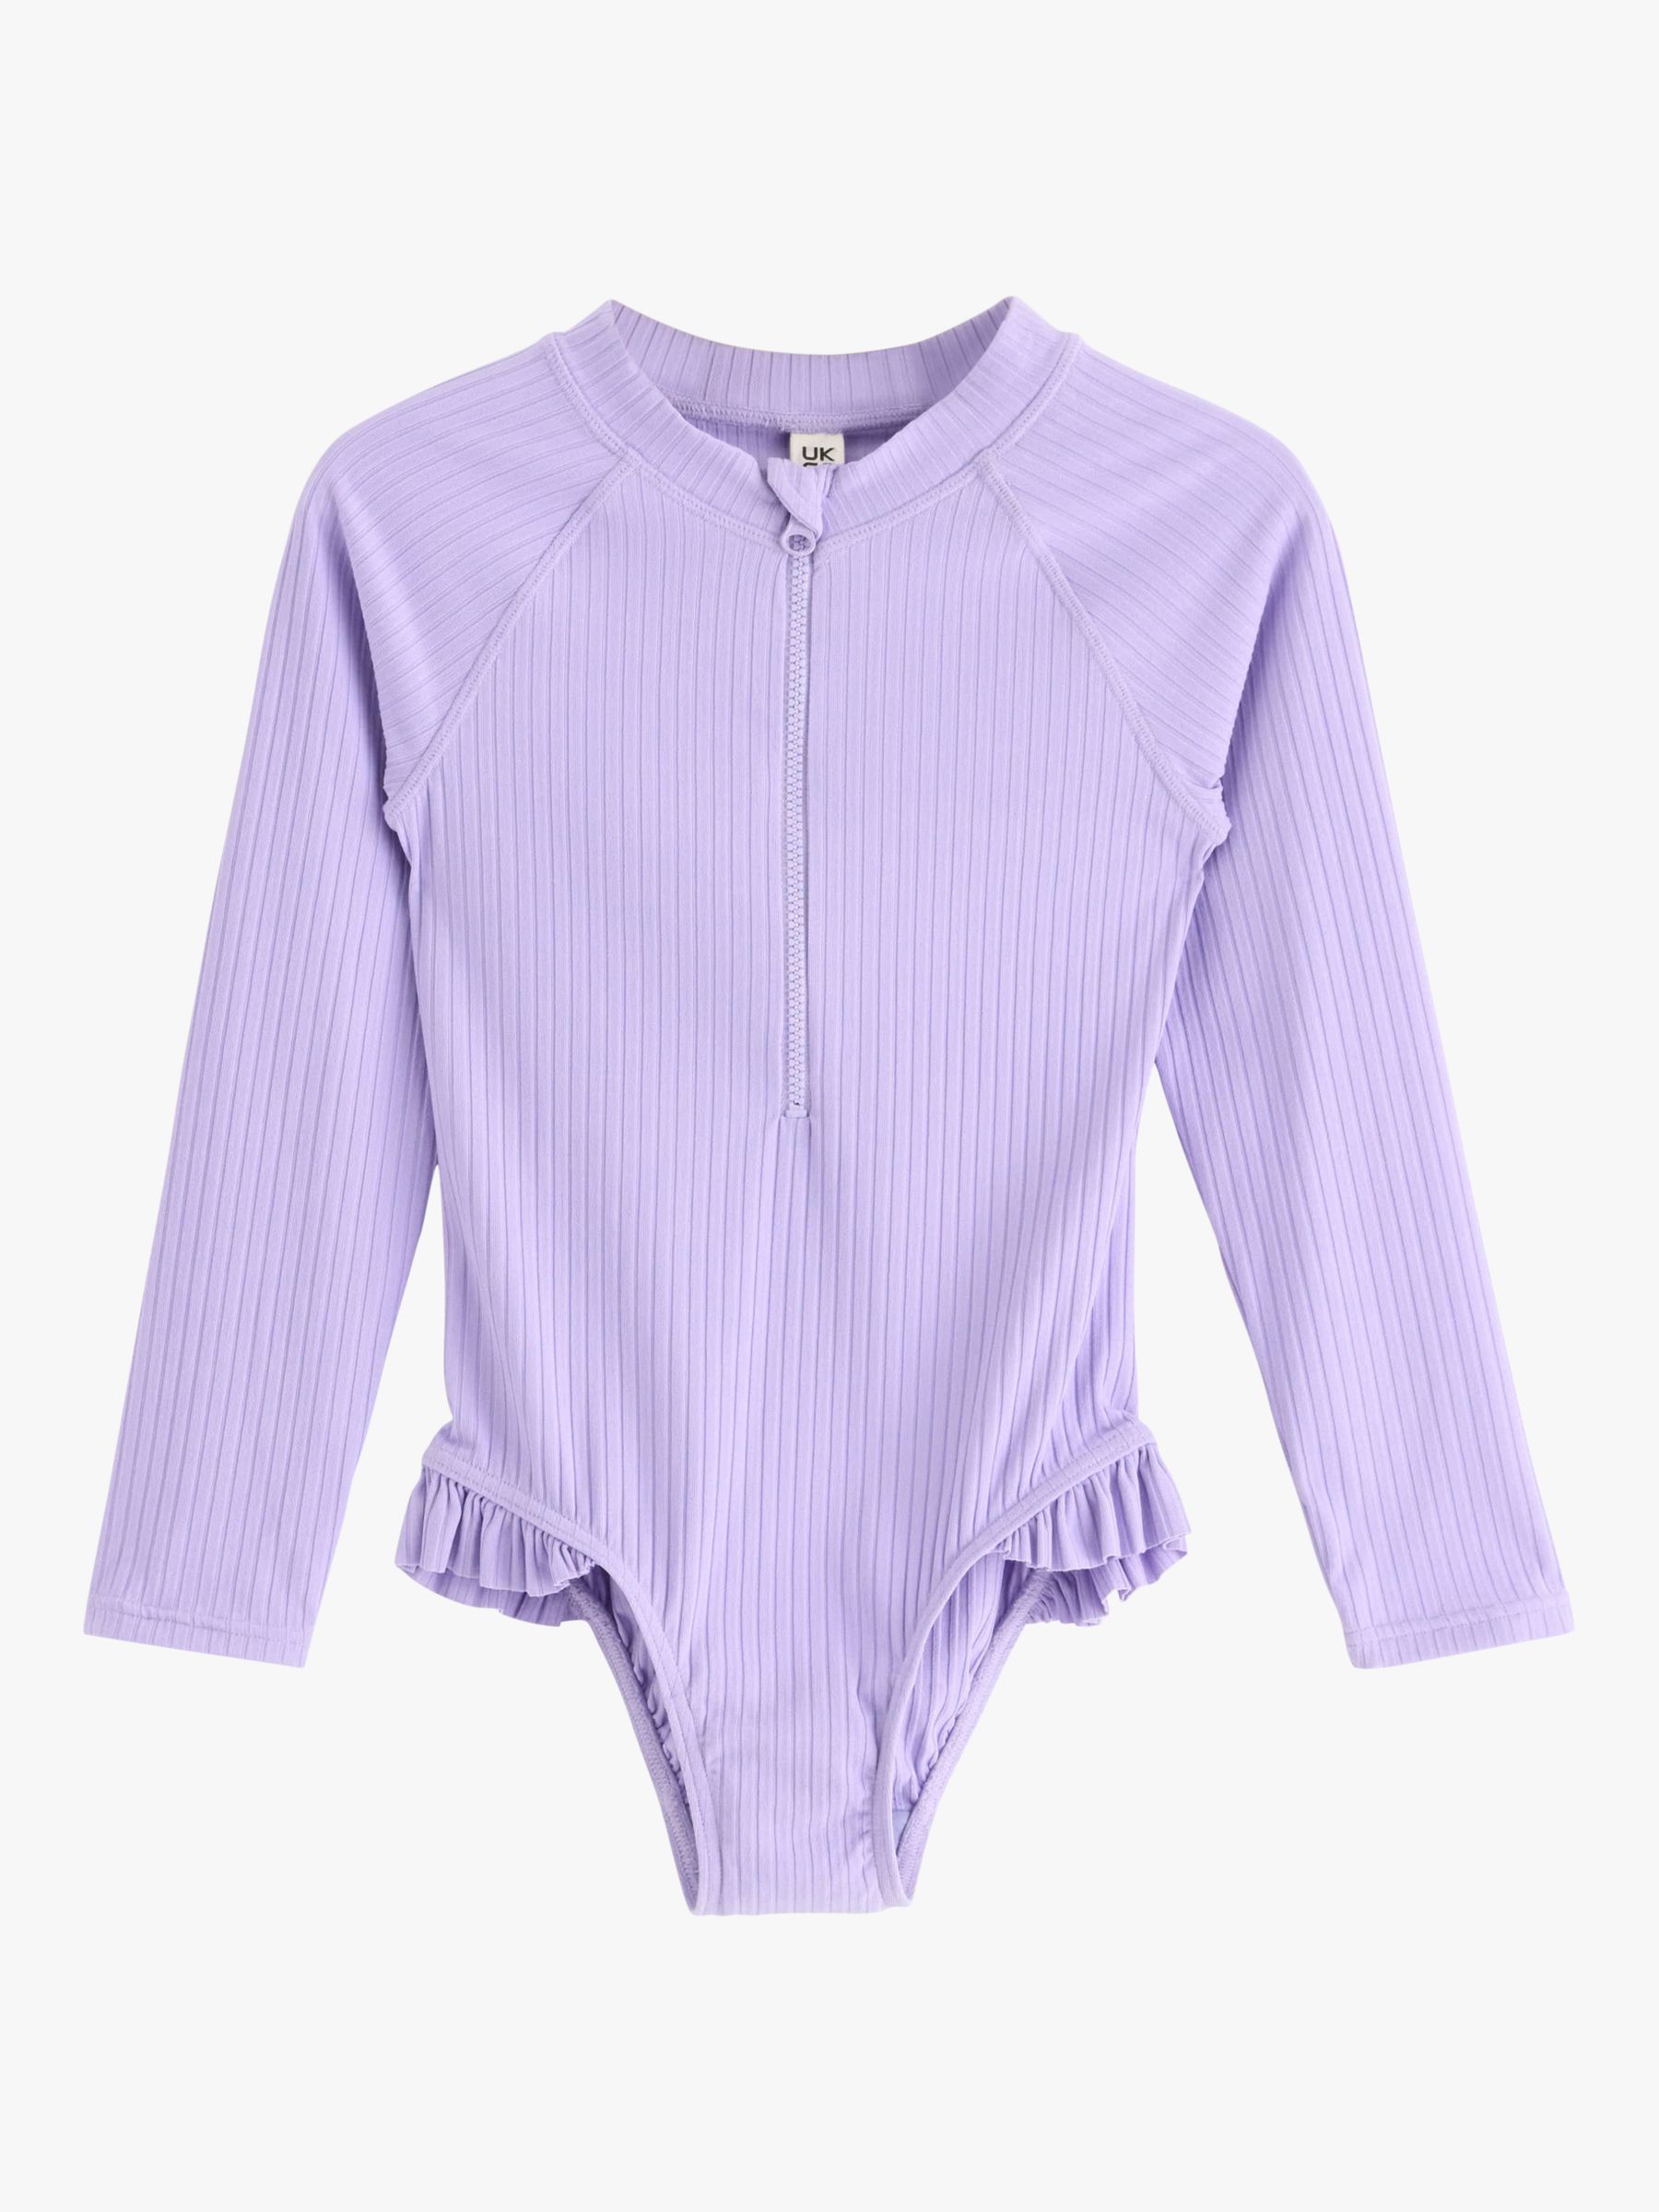 Lindex Kids' UV 50+ Protection Rib Long Sleeve Swimsuit, Light Lilac, 12-24 months